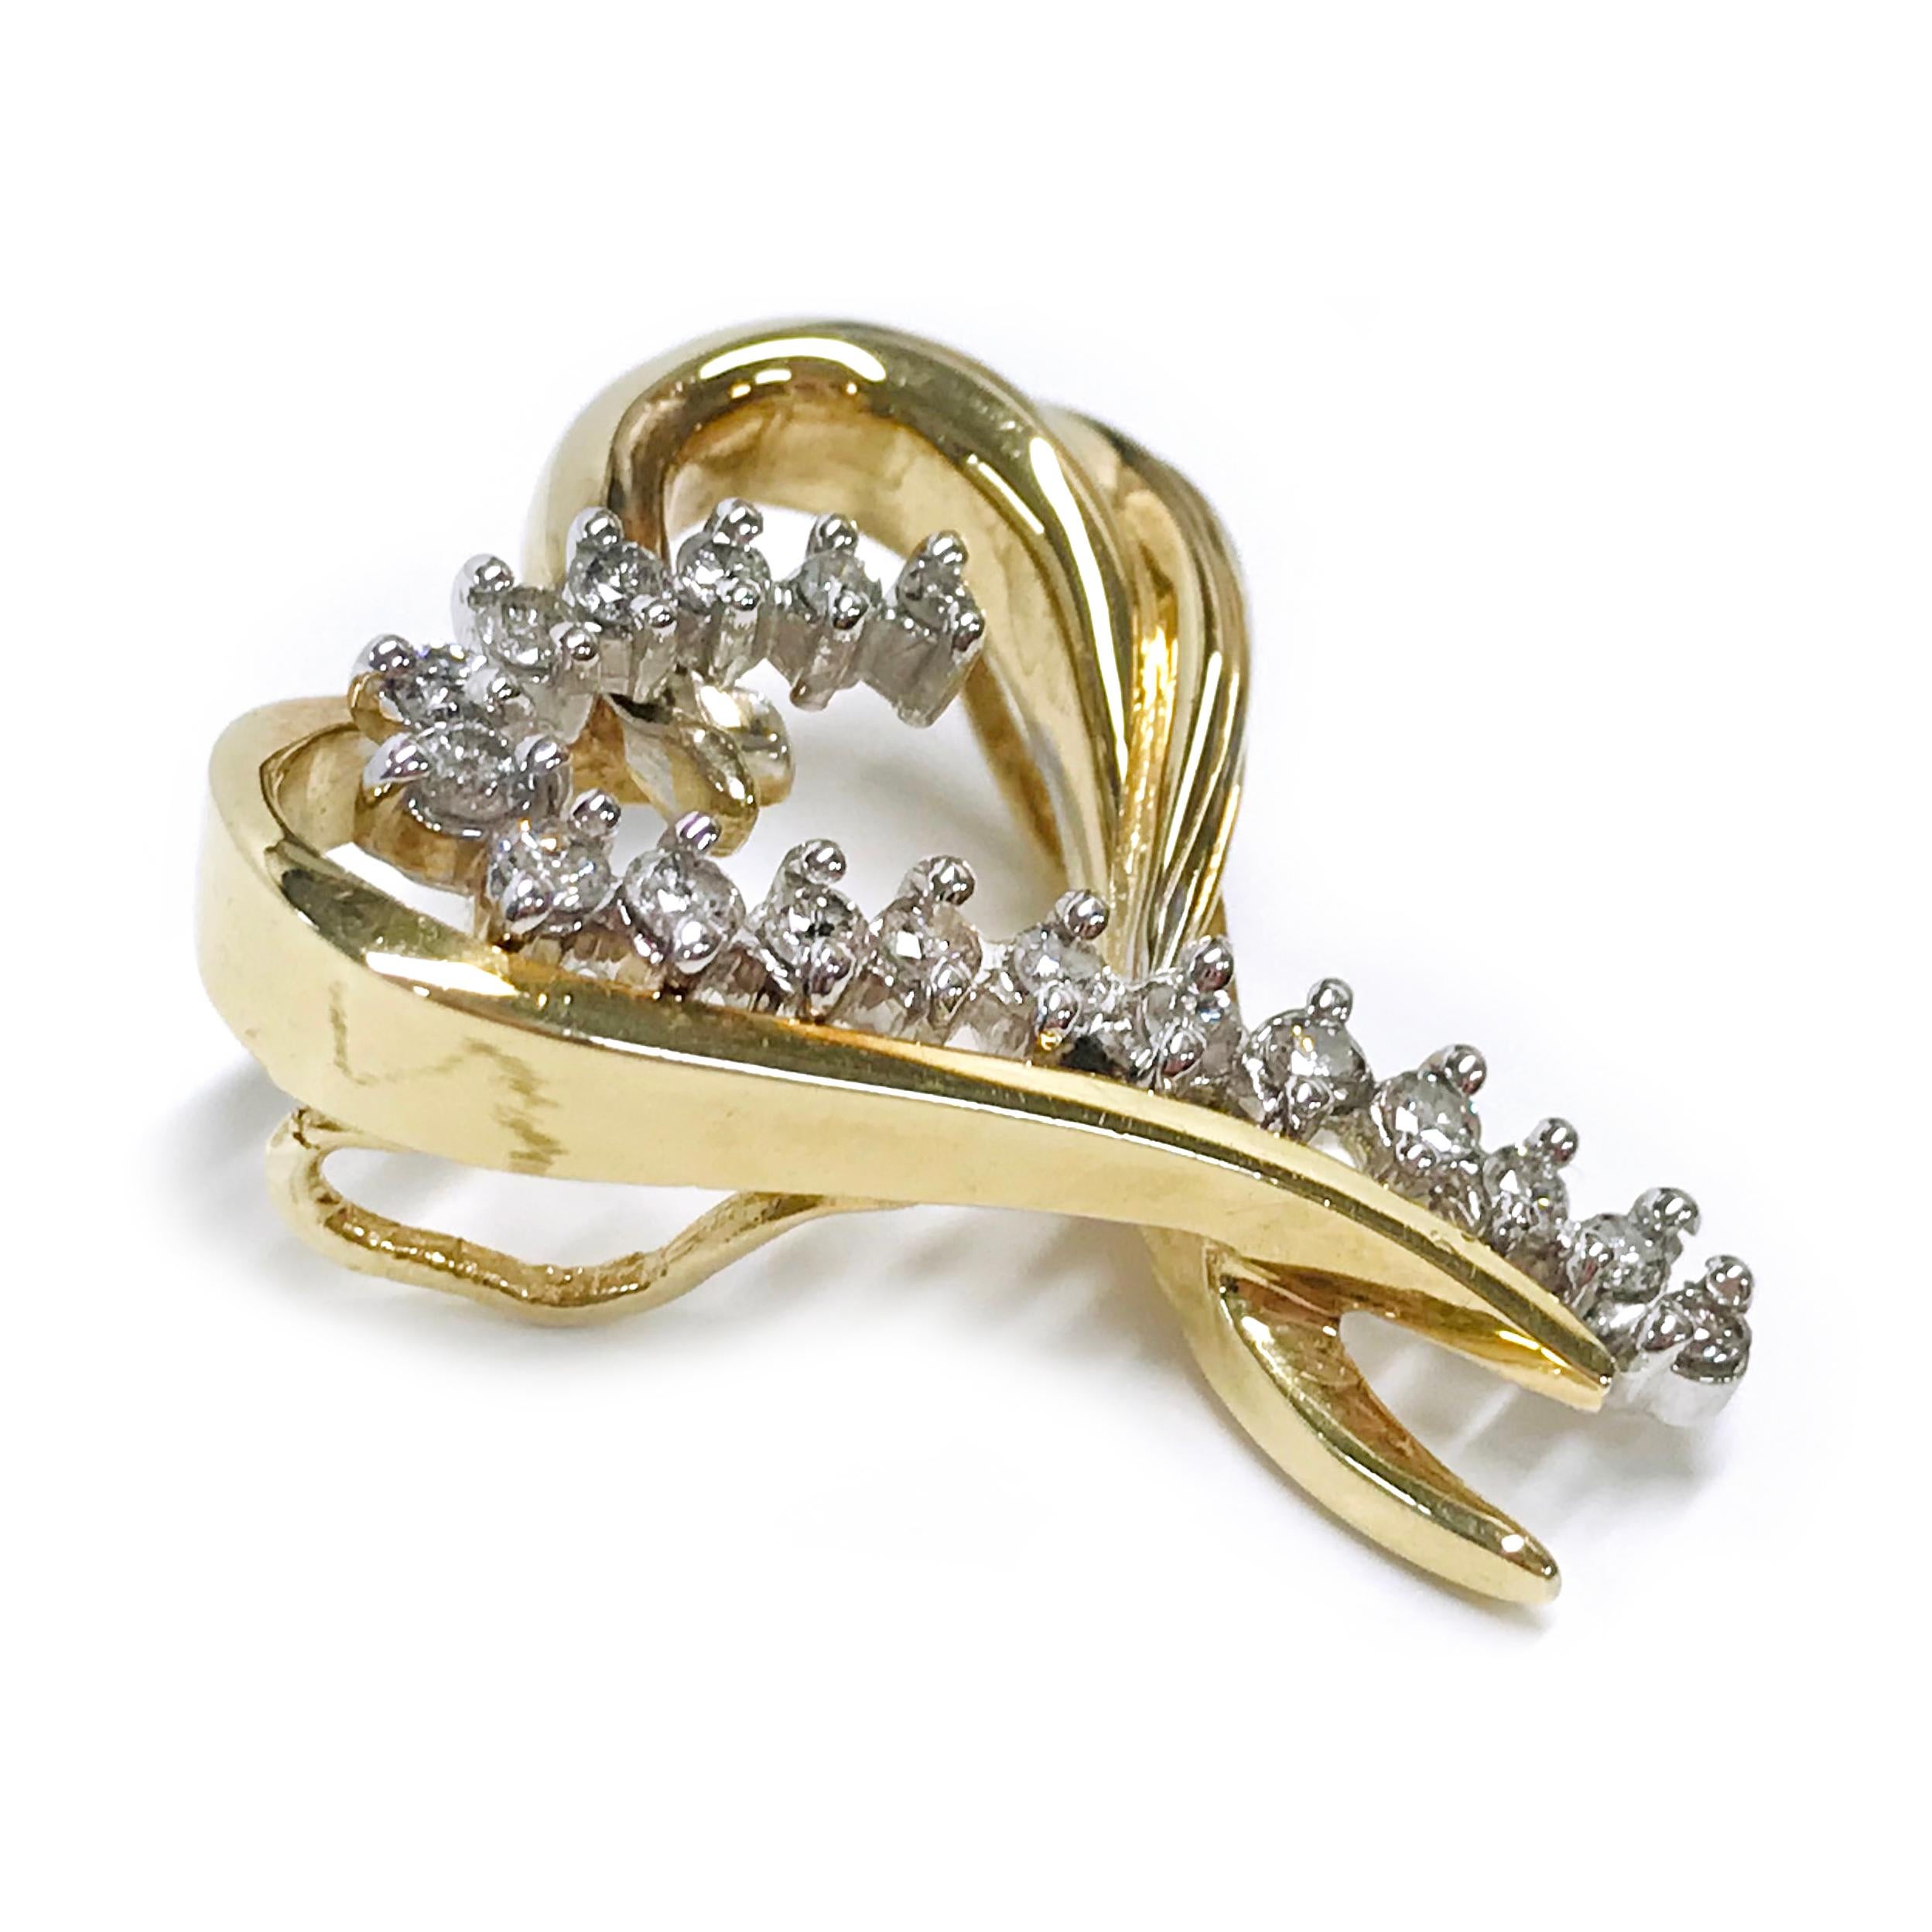 14 Karat yellow and white gold Diamond Heart Slide Pendant. The heart-shaped pendant features gold swooshes that create a heart and along with one of the gold, swooshes are eighteen round diamonds, all prong-set in white gold. The pendant measures